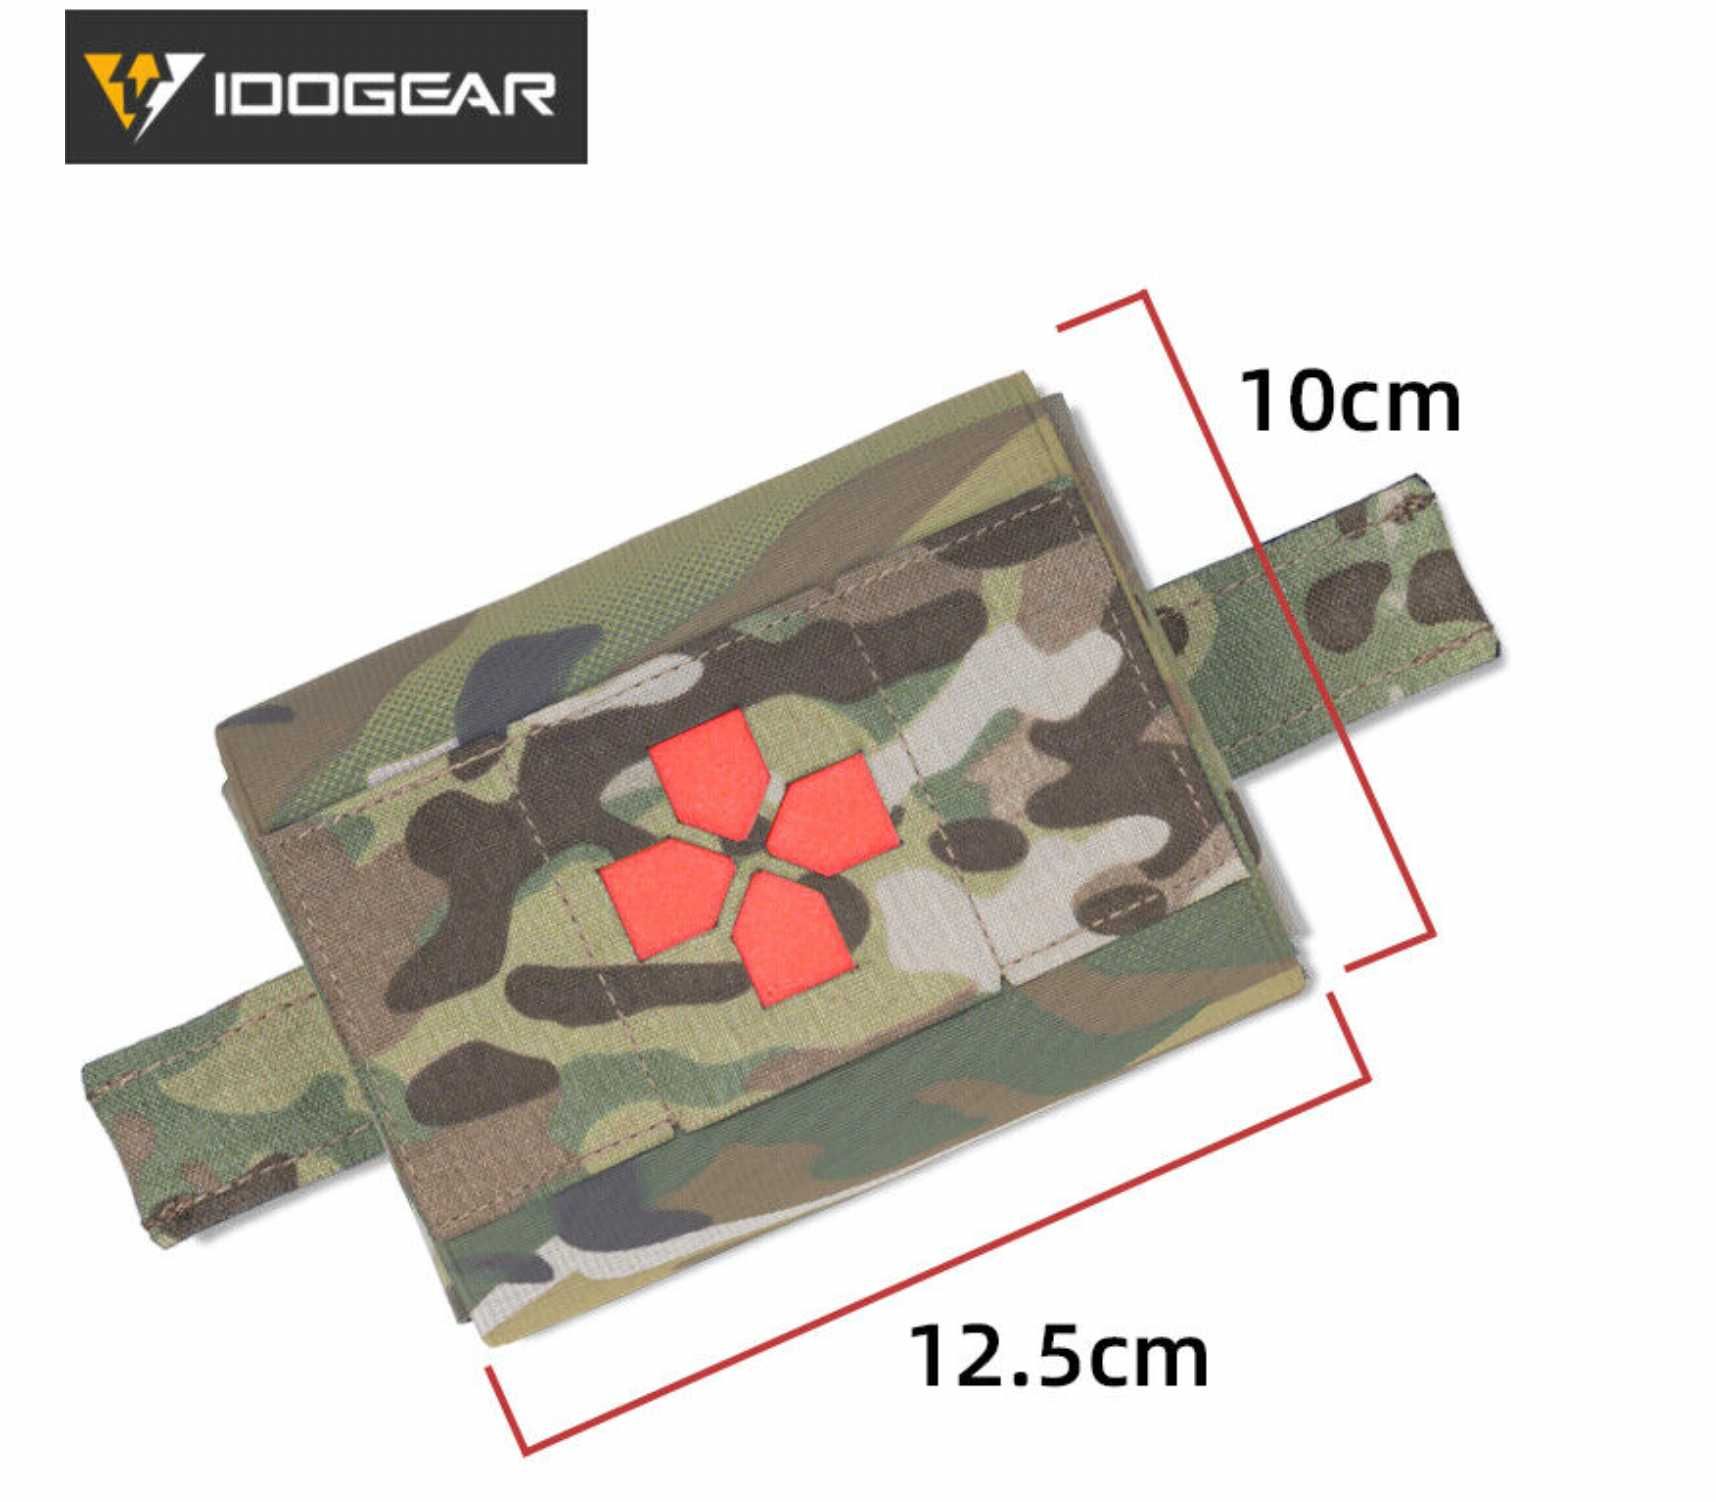 IDOGEAR IG-BG3571-MC MICRO Blow-out Med Kit Pouch